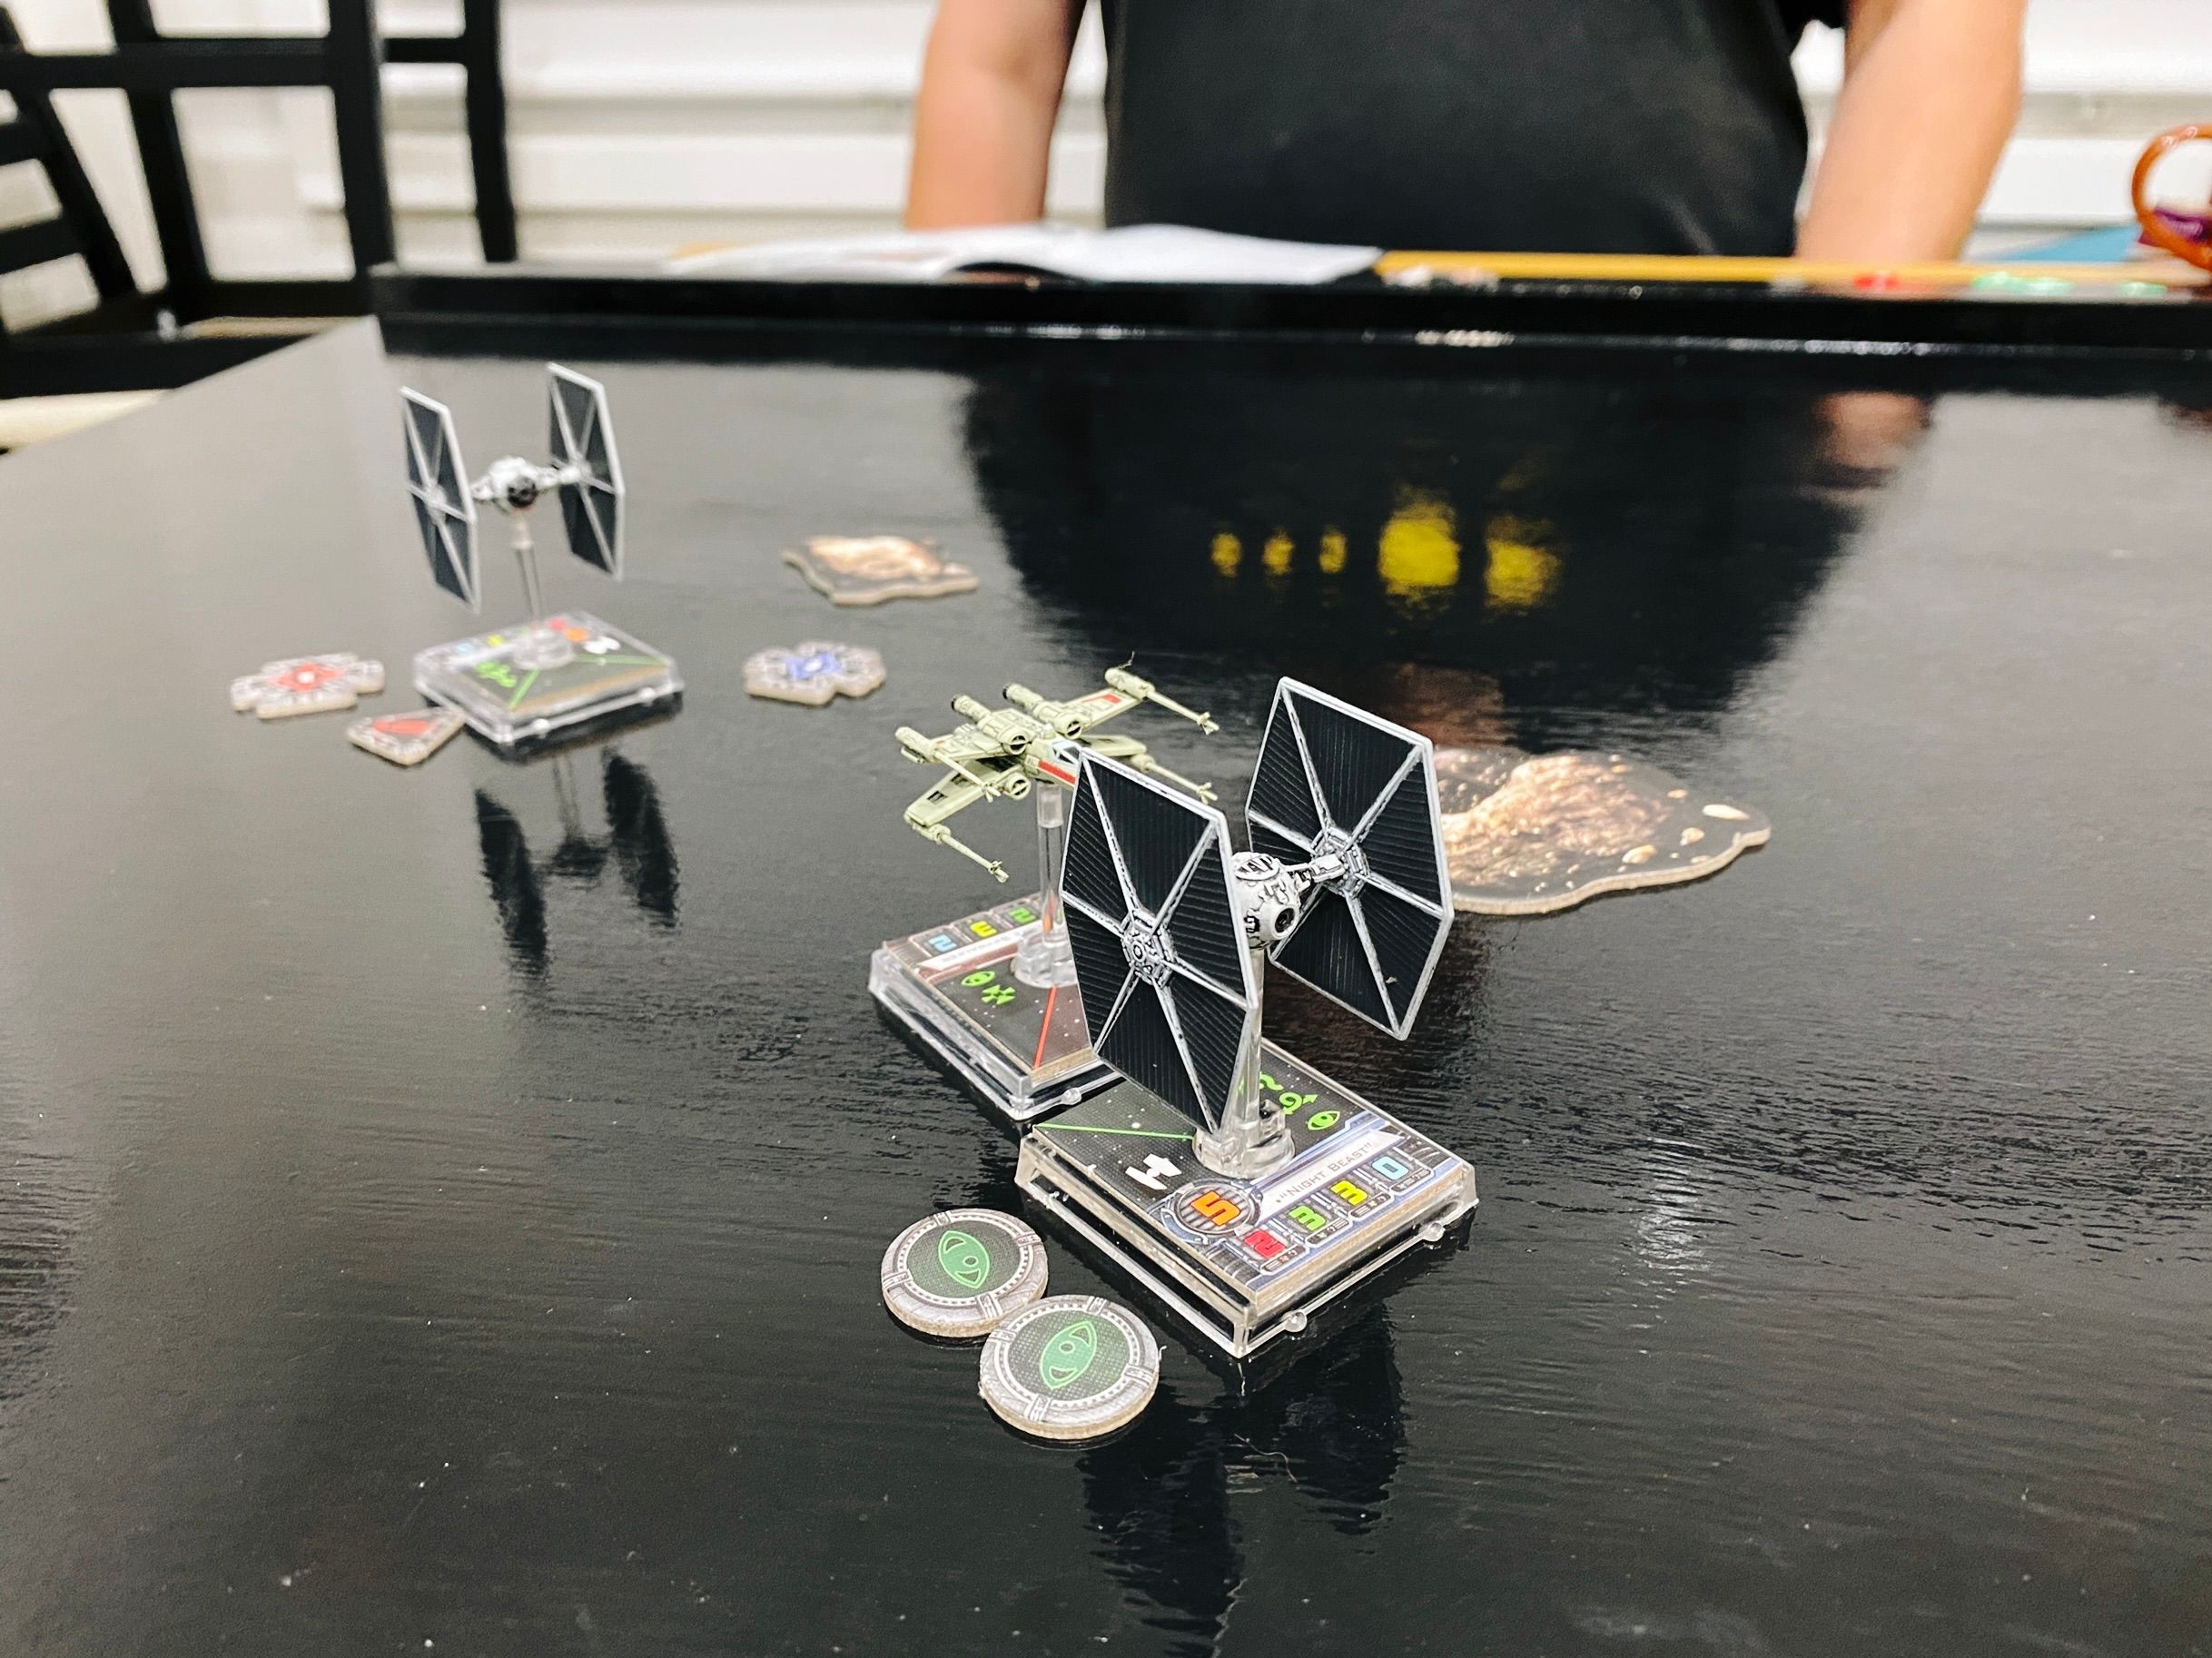 A photo of the X-wing and the TIE Fighter directly facing each other, with literally a few millimetres separating their bases.